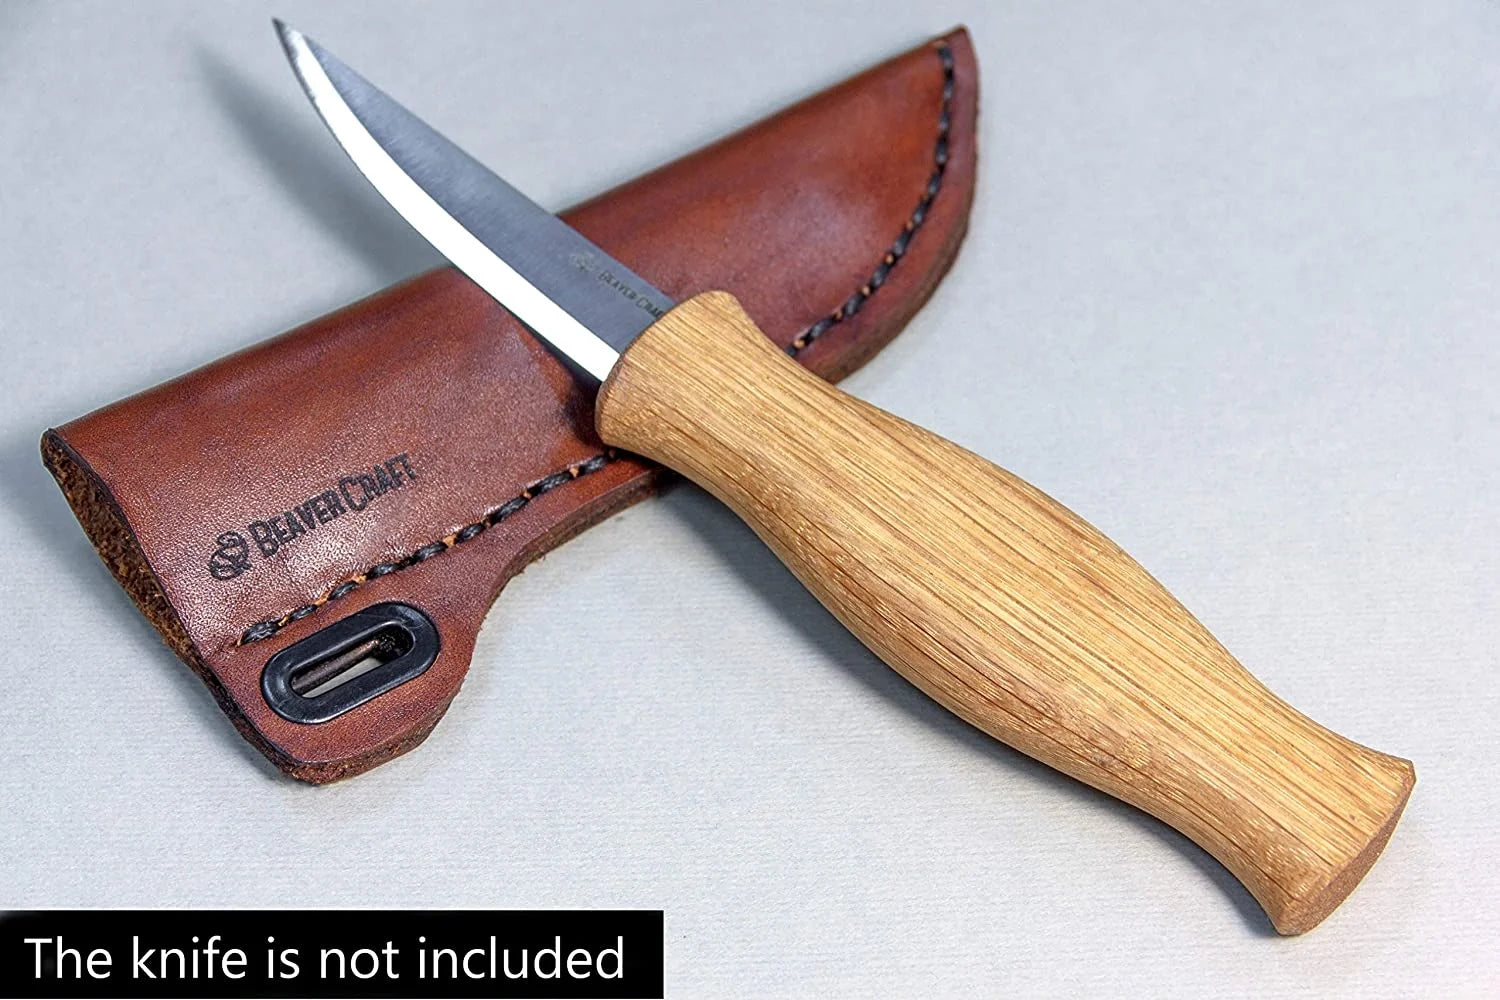 Buy leather sheath online for carving knife - leather knife case